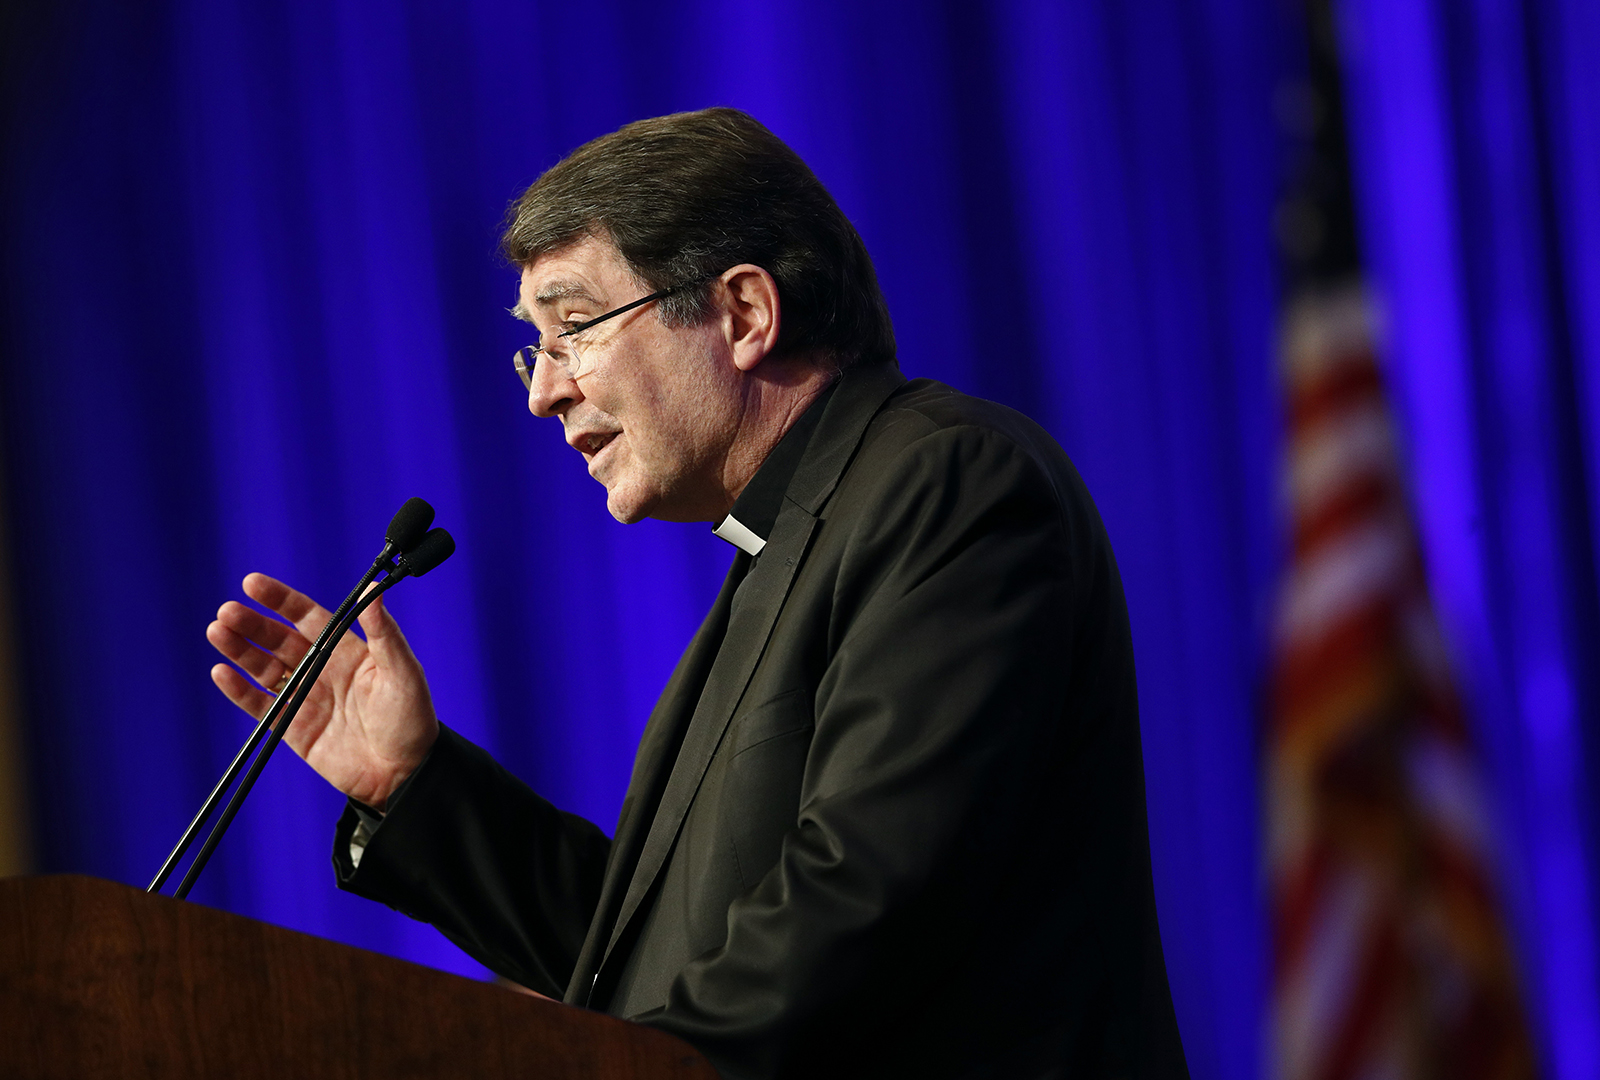 Archbishop Christophe Pierre, Apostolic Nuncio to the United States, delivers remarks at the United States Conference of Catholic Bishops' annual fall meeting in Baltimore, Monday, Nov. 13, 2017. (AP Photo/Patrick Semansky)